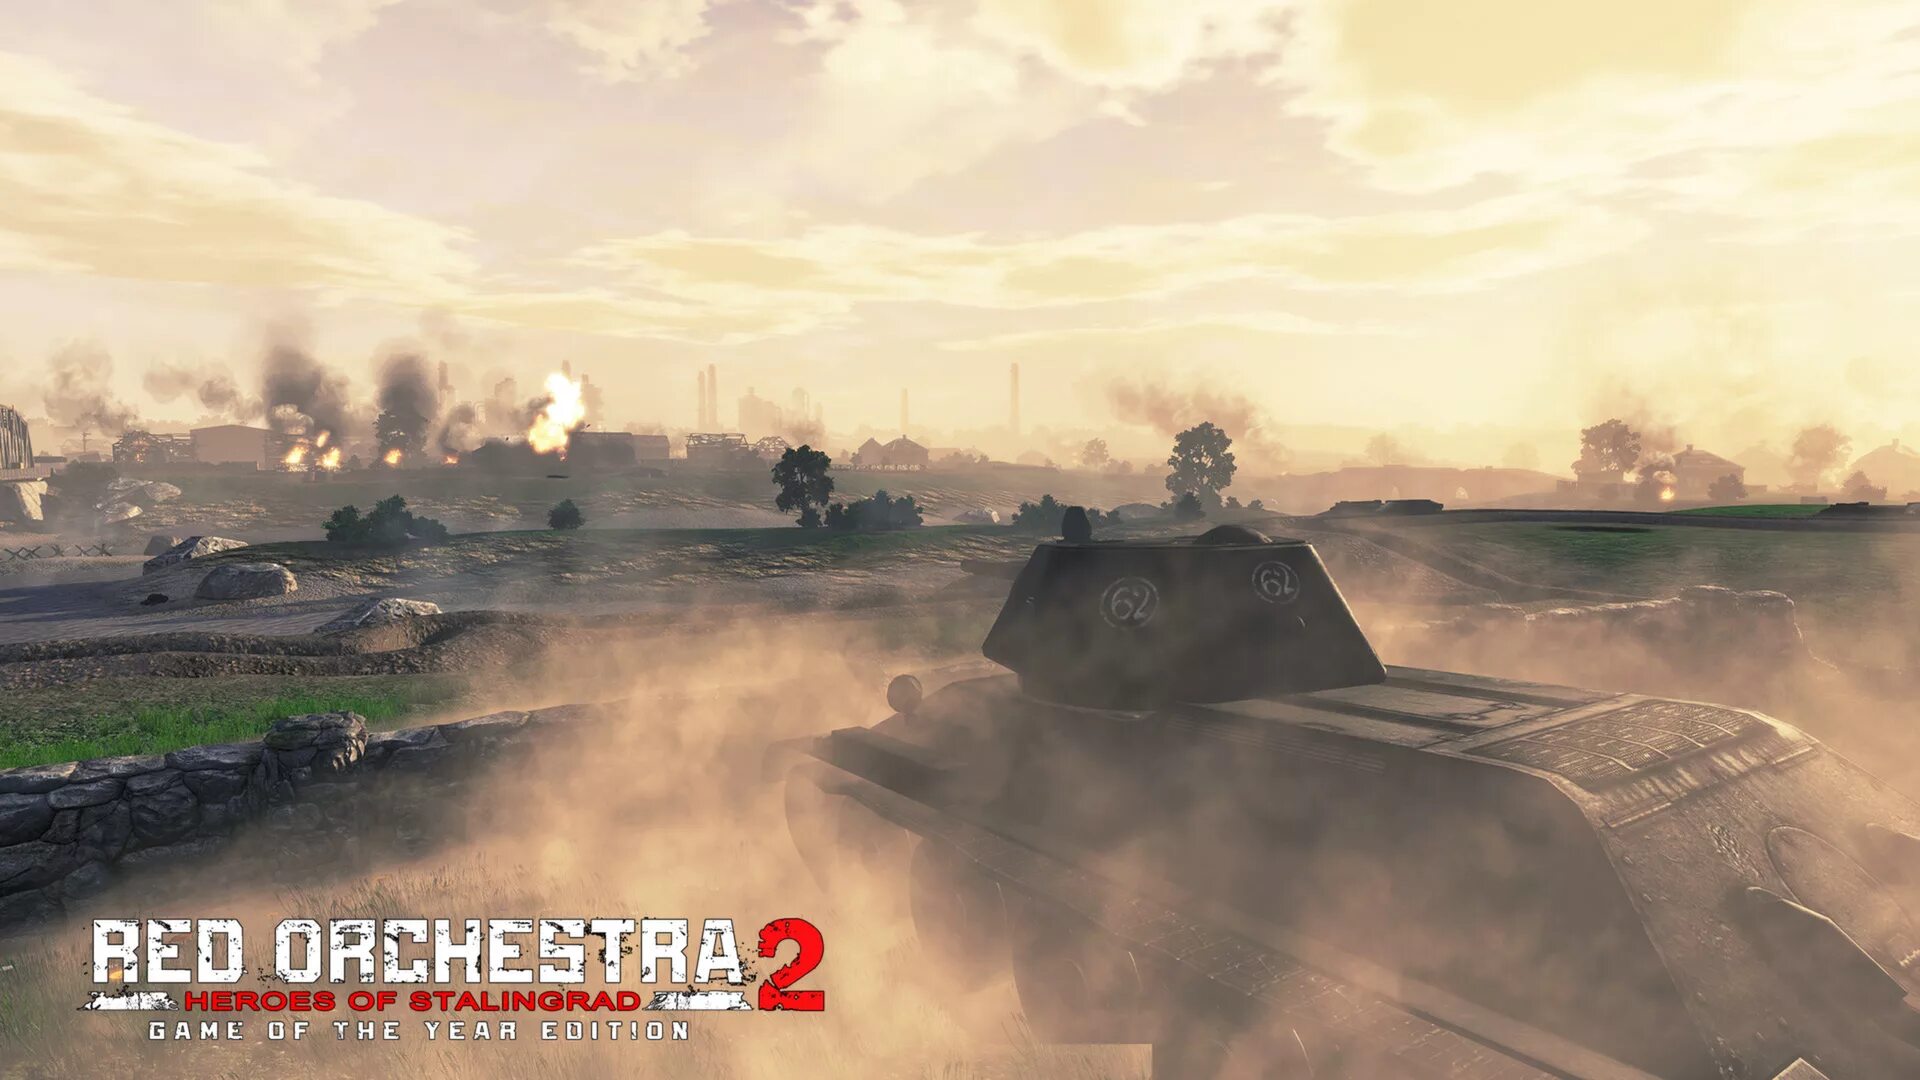 Red Orchestra 2 танки. Rising Storm Stalingrad Red Orchestra. Rising Storm 2 Red Orchestra 2. Red Orchestra 2 Heroes of Stalingrad танки.